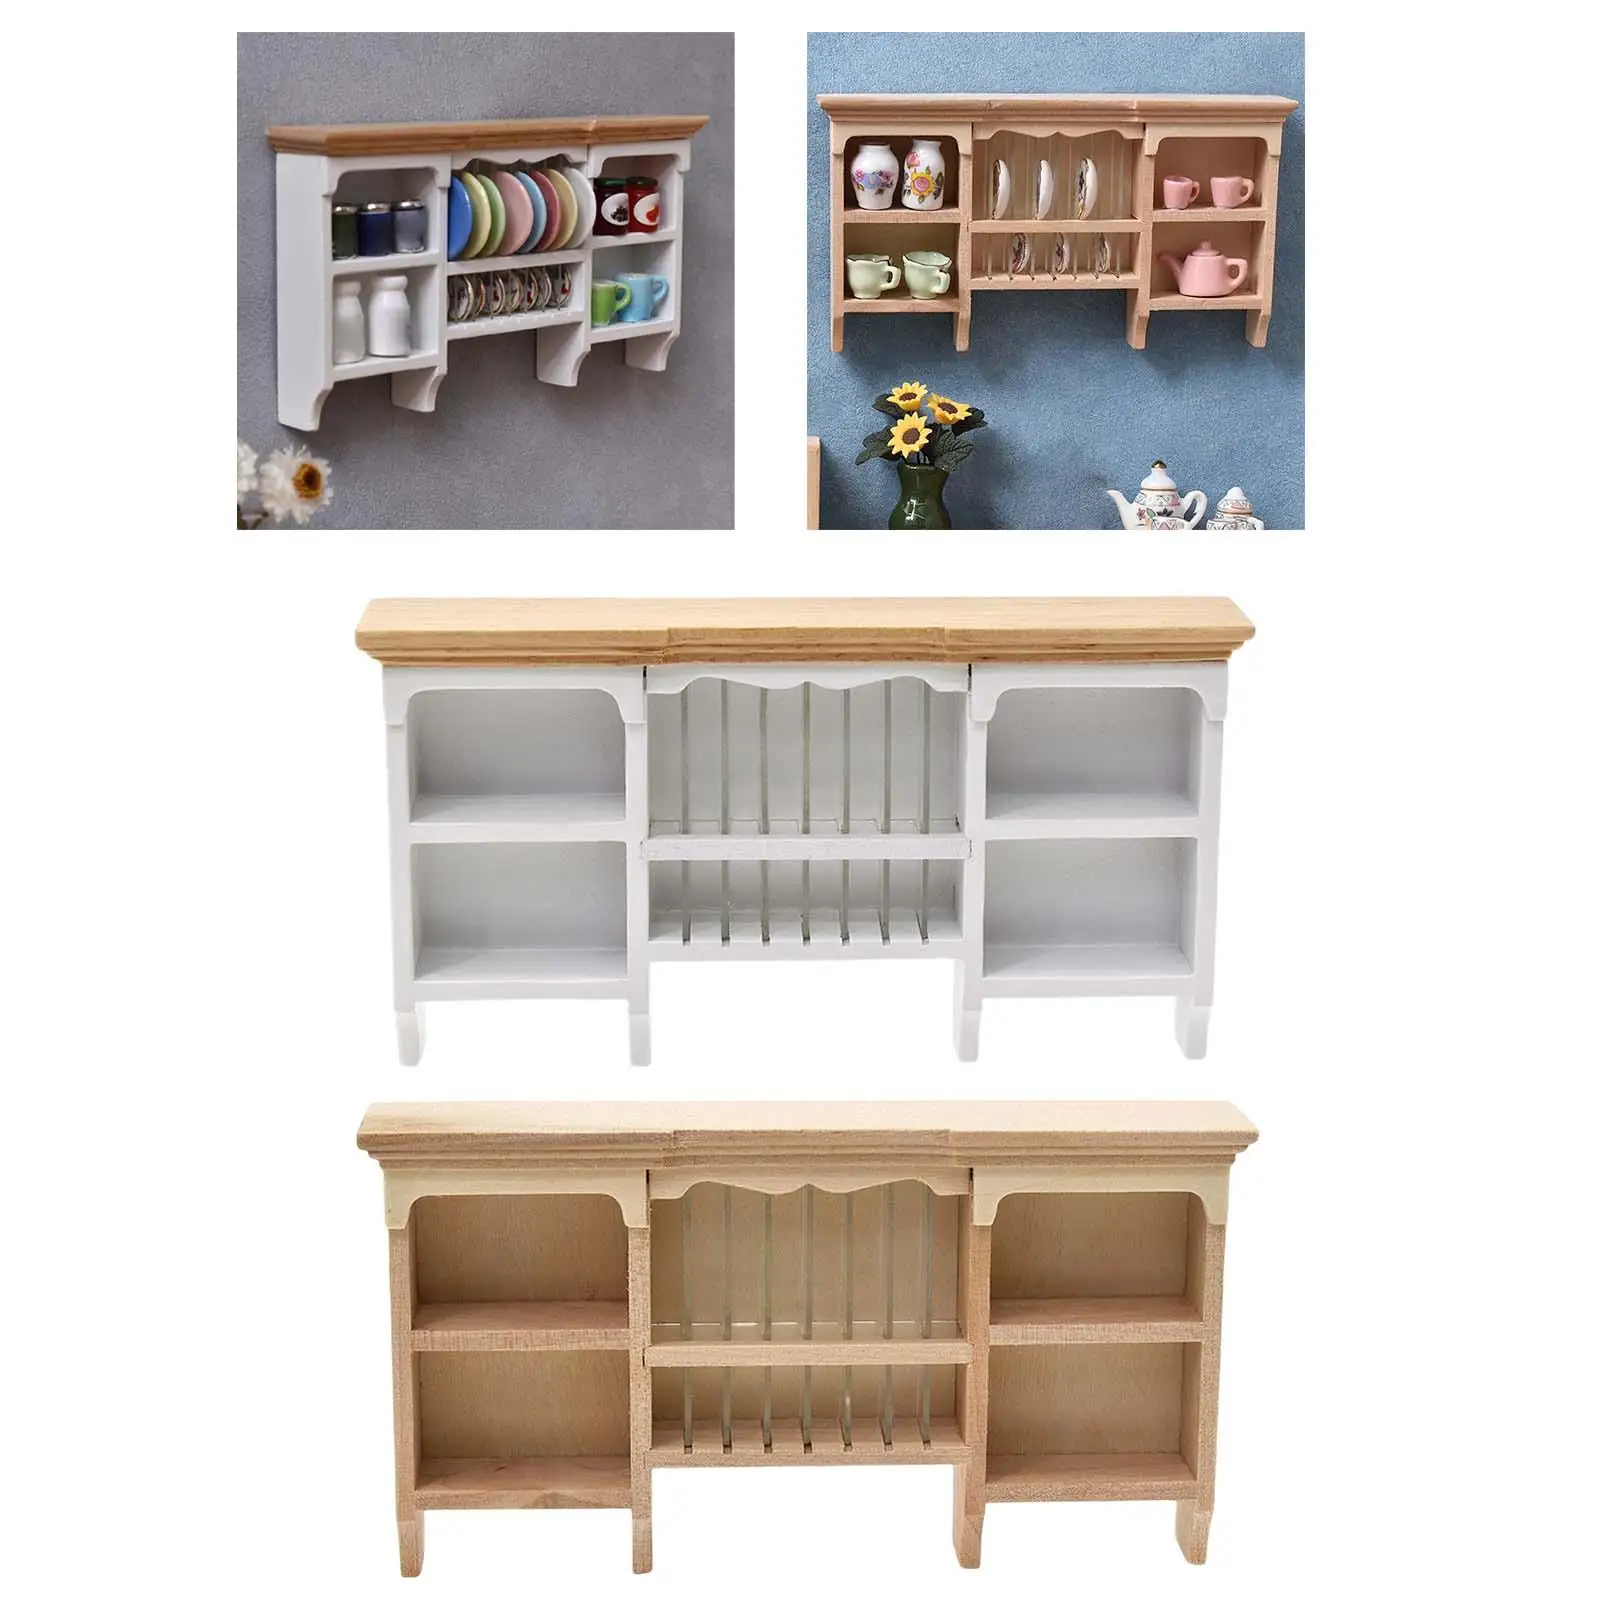 1/12 Doll House Furnishings for Dollhouses Pretend Play Toys Accessory